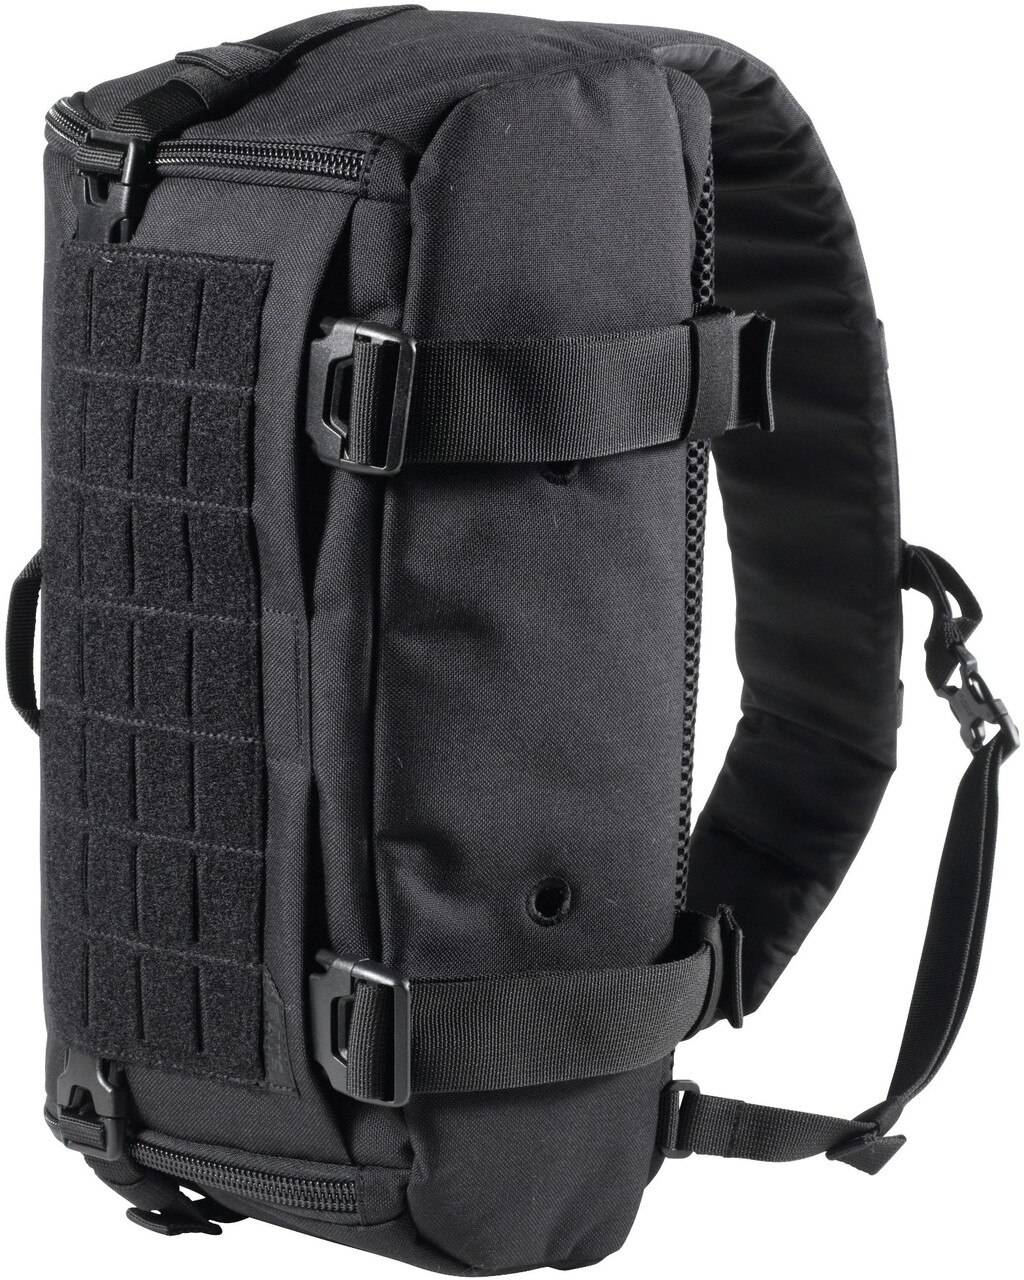 5.11 Tactical on X: Our LV10 sling pack is your new low-vis solution for  an EDC bag. With over 13L of storage capacity and quick access to your CCW  compartment, it's your